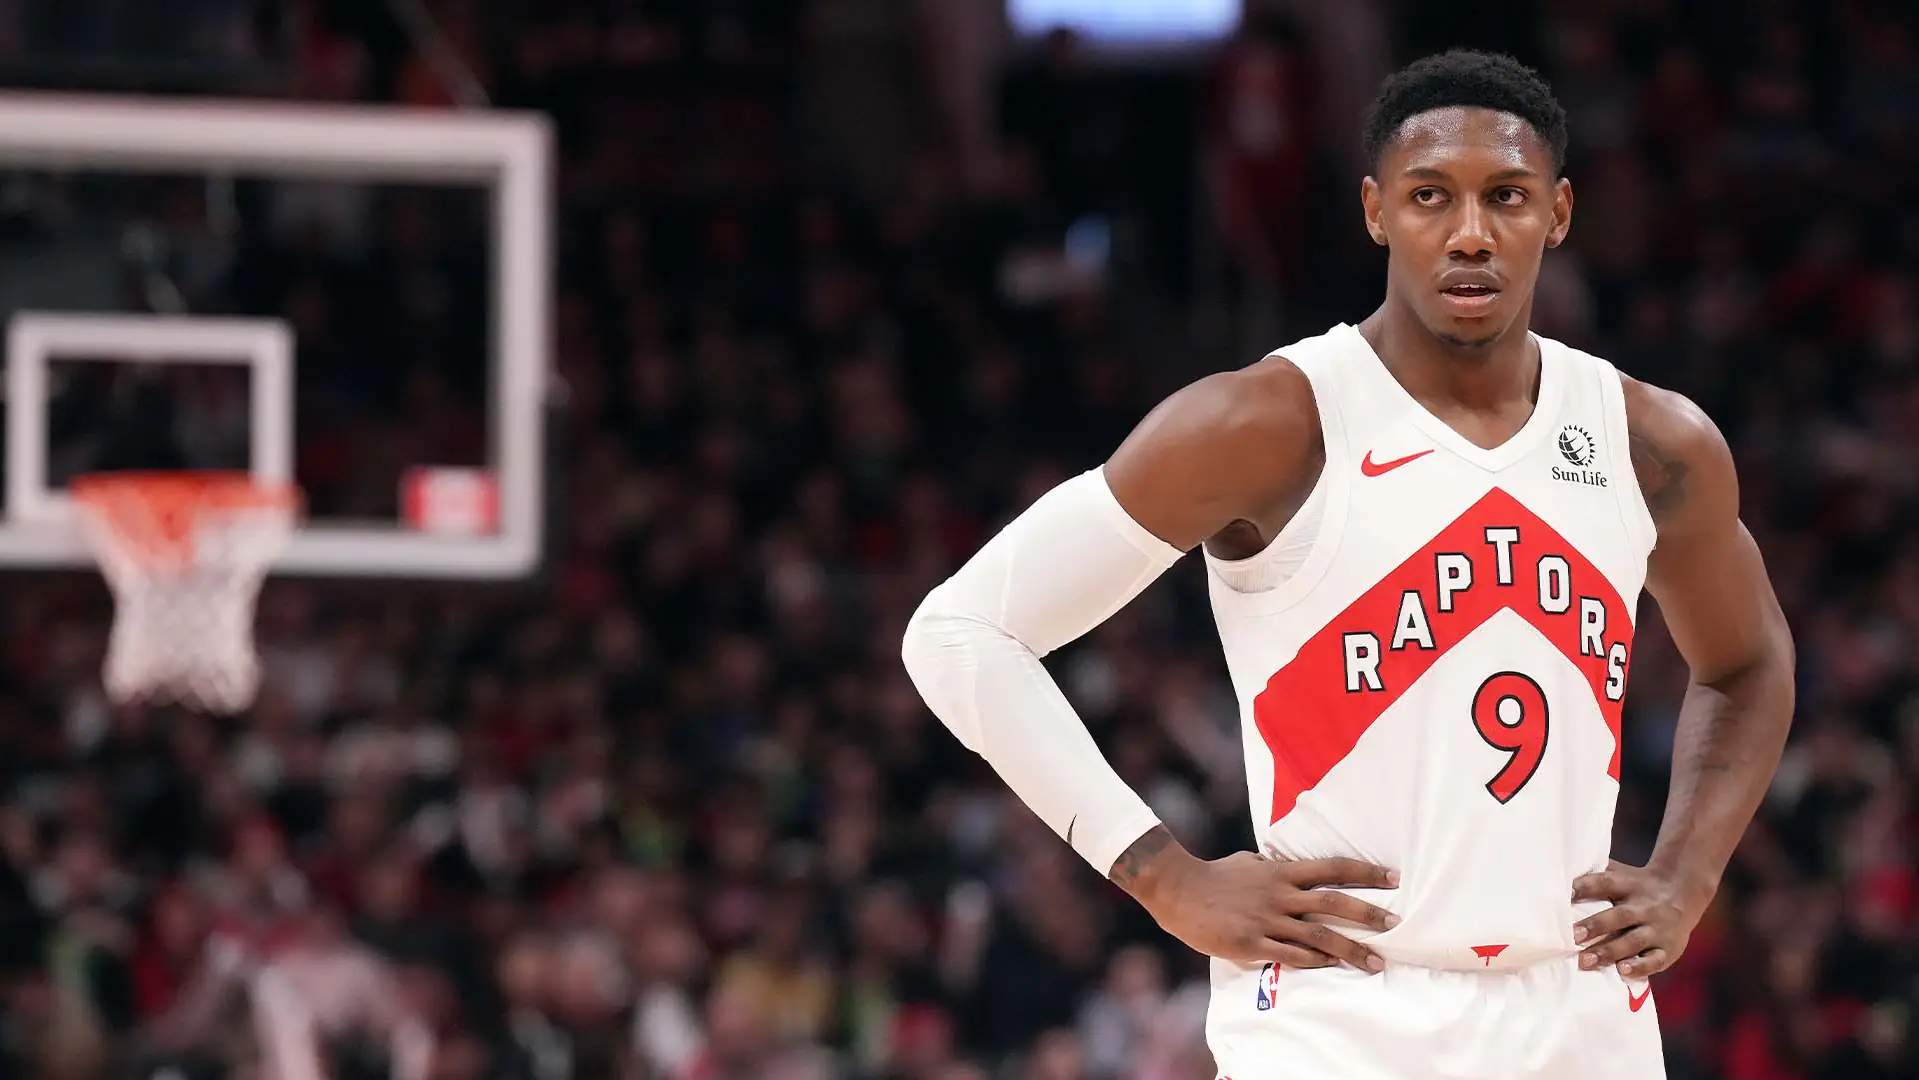 Toronto Raptors' Weekend Ups and Downs Trade Shakes Up Team, Narrow Losses to Celtics and Pistons Stir Fans-